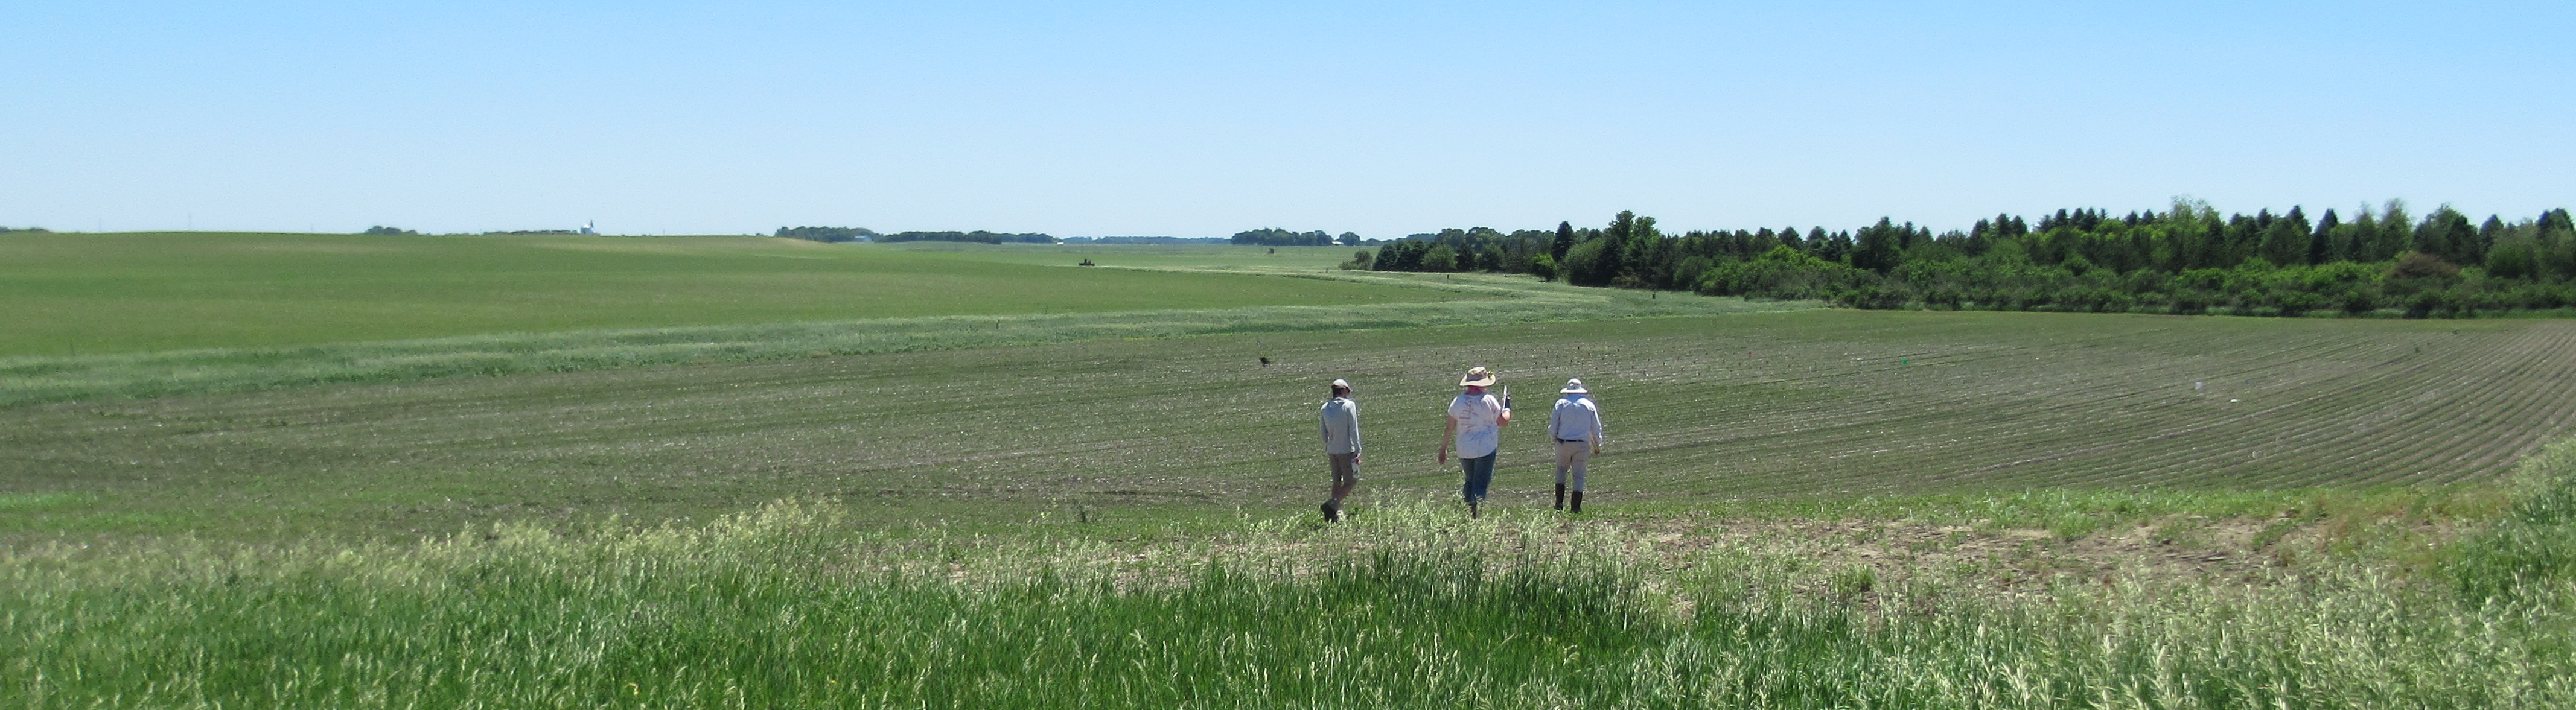 panorama photo of a soybean field in early development, three people walking into it in the distance